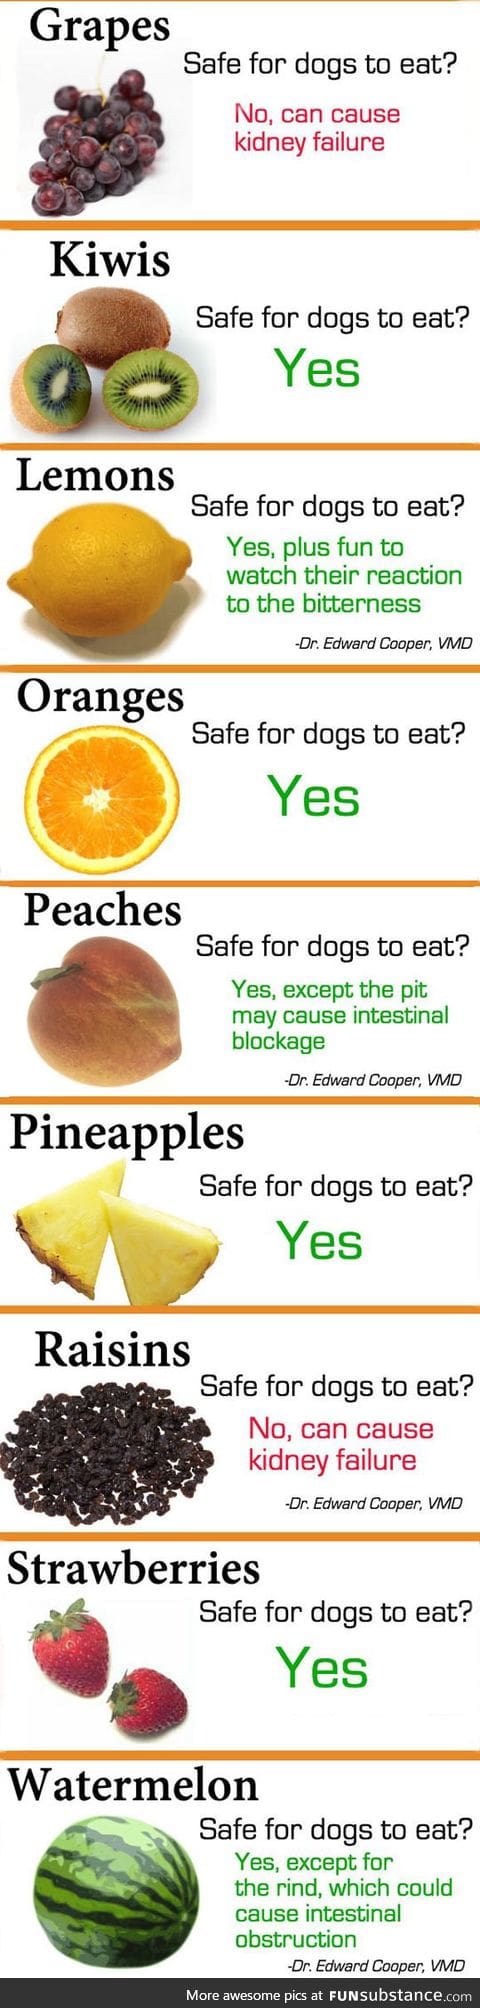 These are the fruits you can and cannot feed your dog